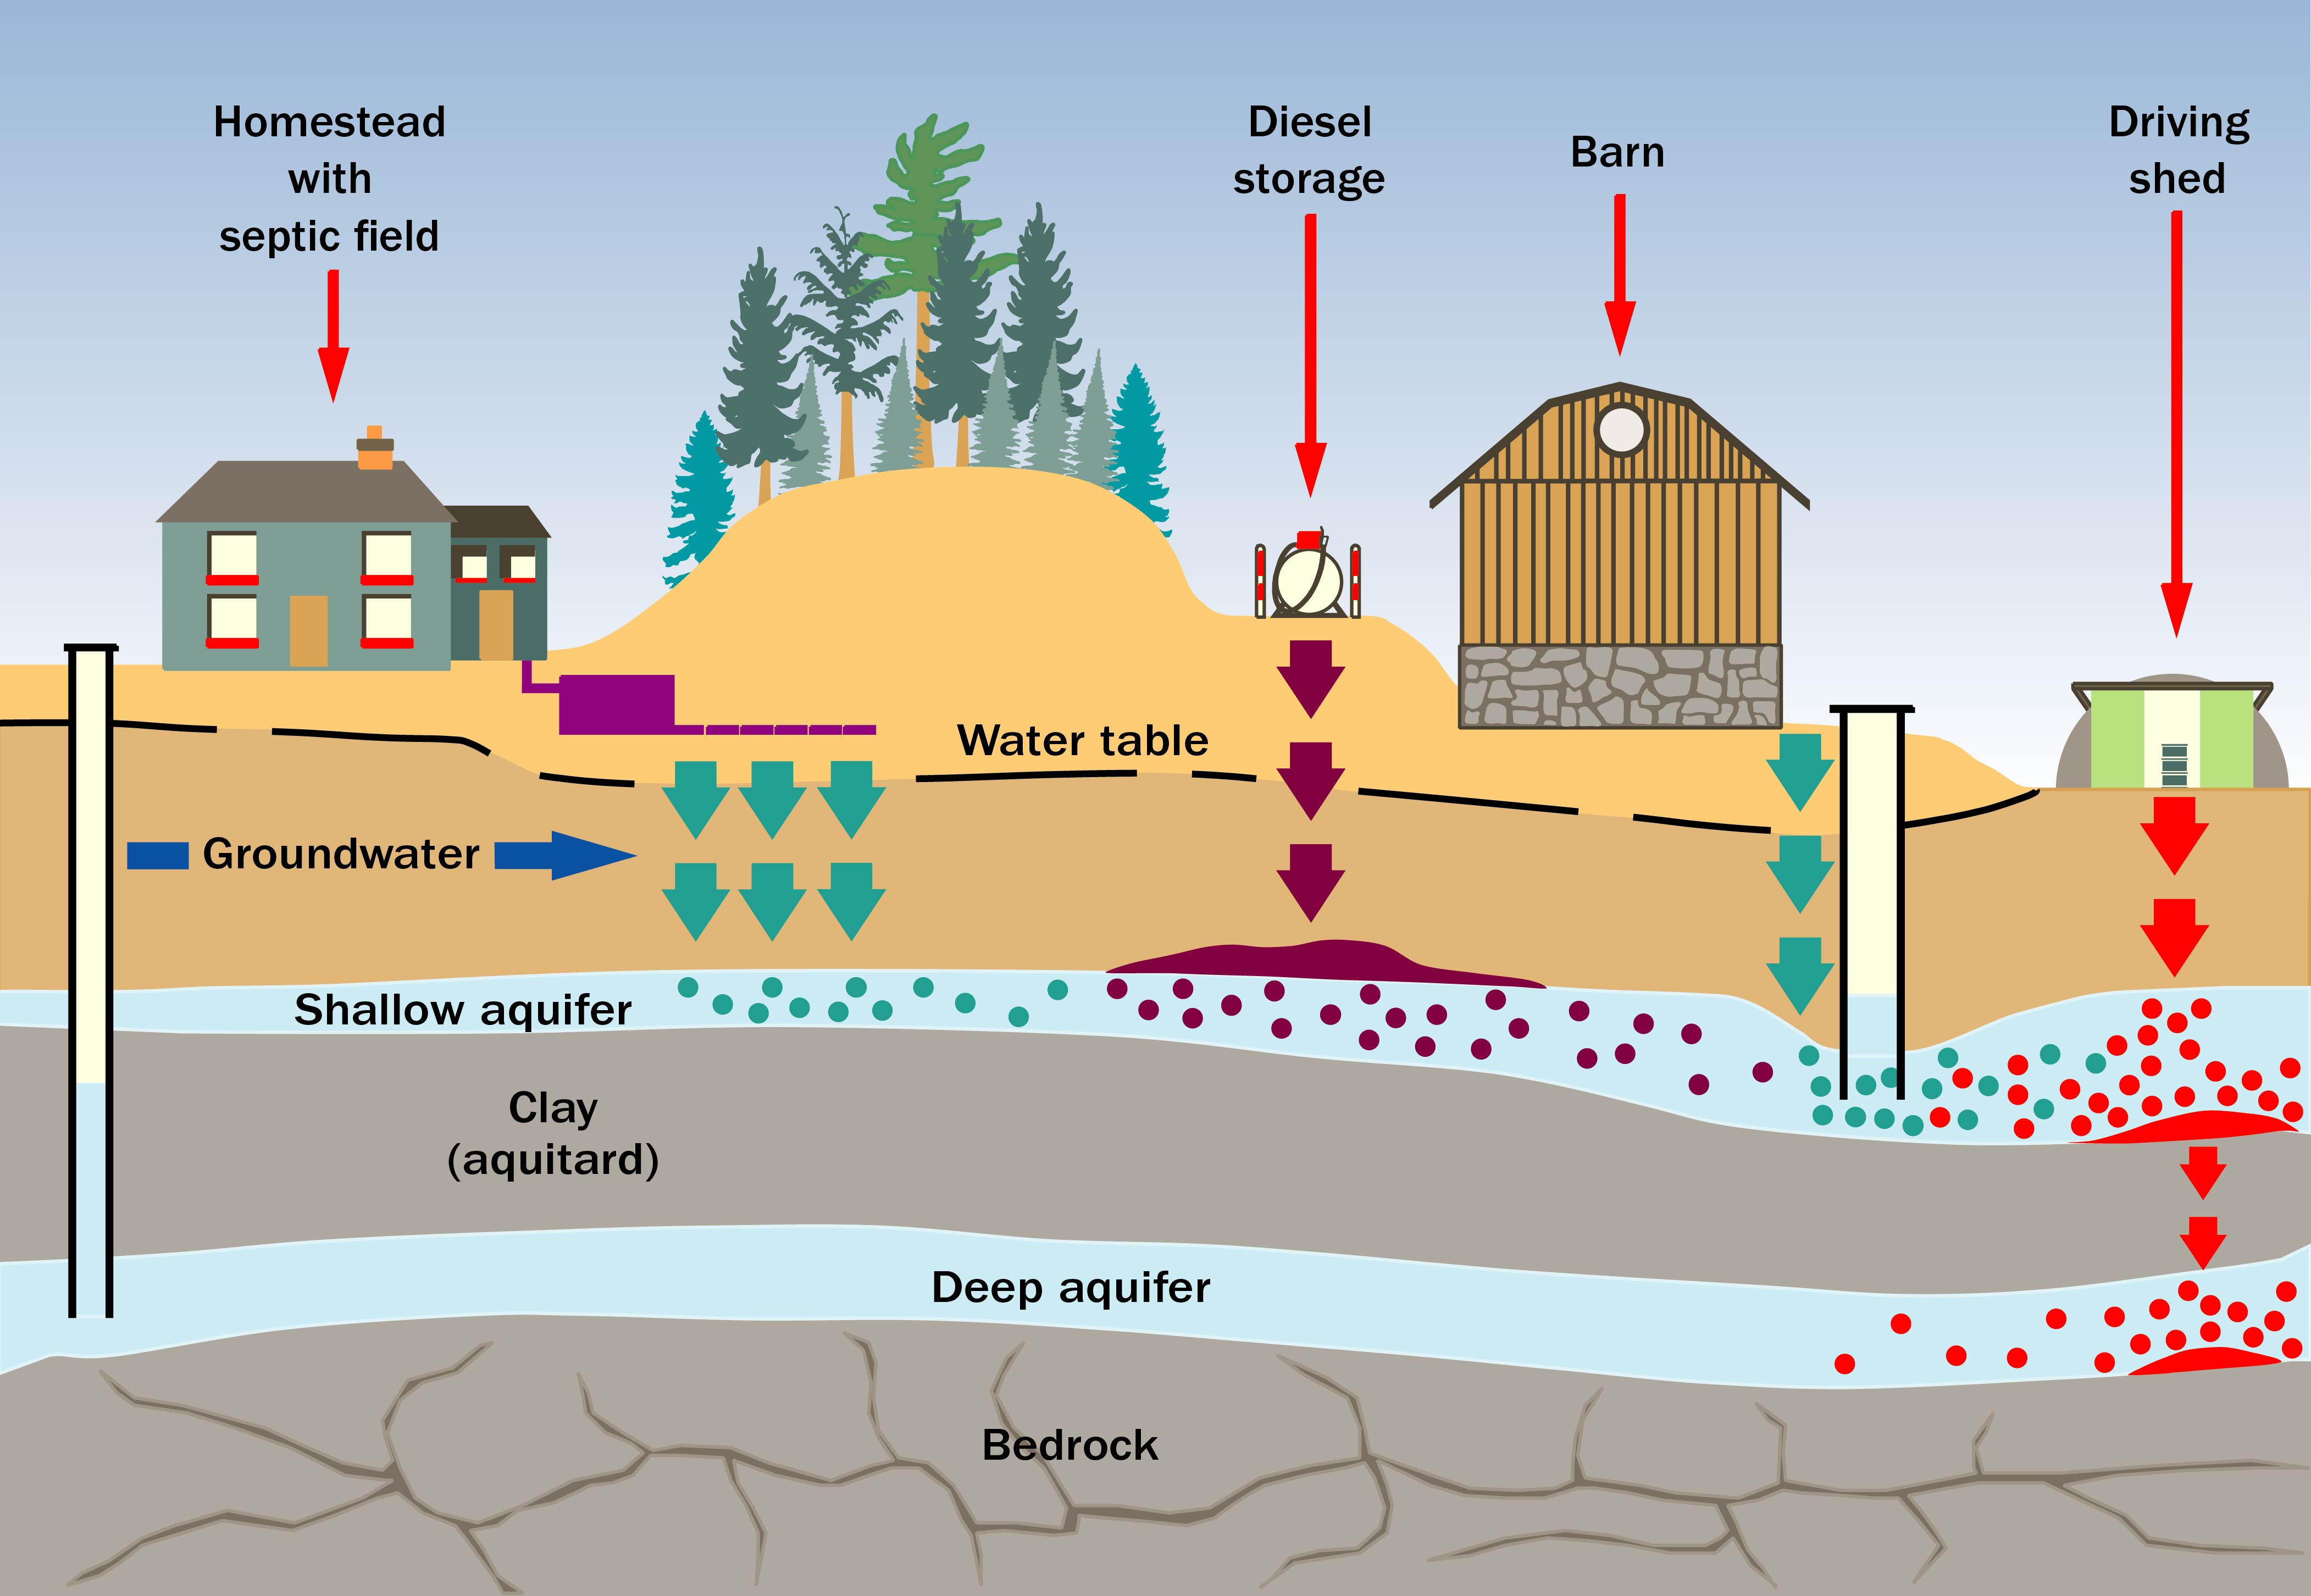 Surface contaminants (septic systems, fuel storage, barns and drive sheds) infiltrating the ground into shallow aquifers, clay aquitards and bedrock aquifers. An abandoned well is a channel for the contaminants to reach deeper bedrock aquifers